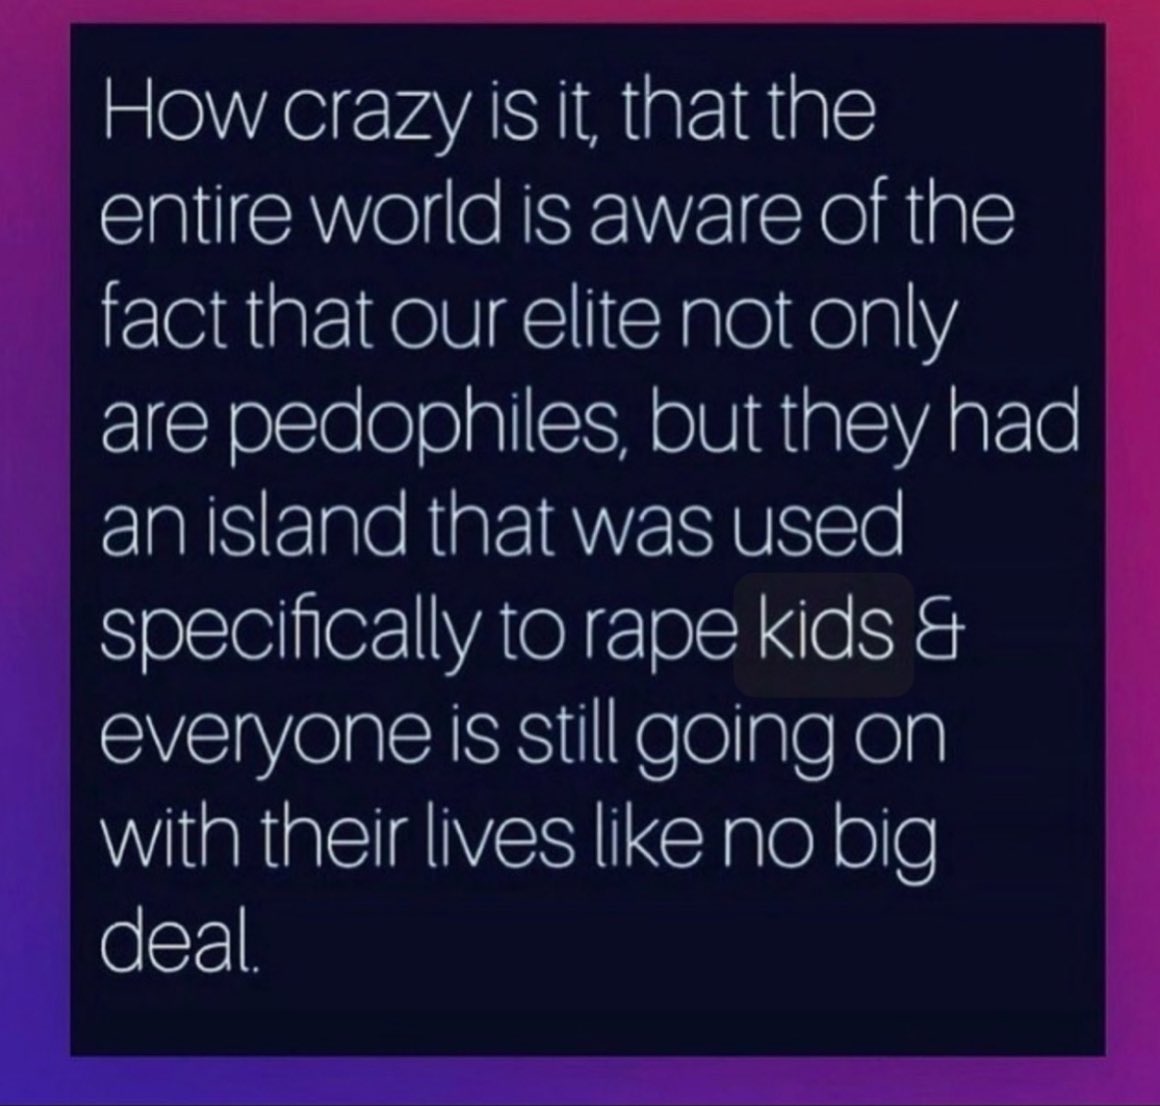 How crazy is it, that the entire world is aware of the fact that our elite not only are pedophiles, but they had an island that was used specifically to rape kids and everyone is still going on with their lives like no big deal.
#The_Great_Awakening_ 
#SaveTheChildrenWorldWide